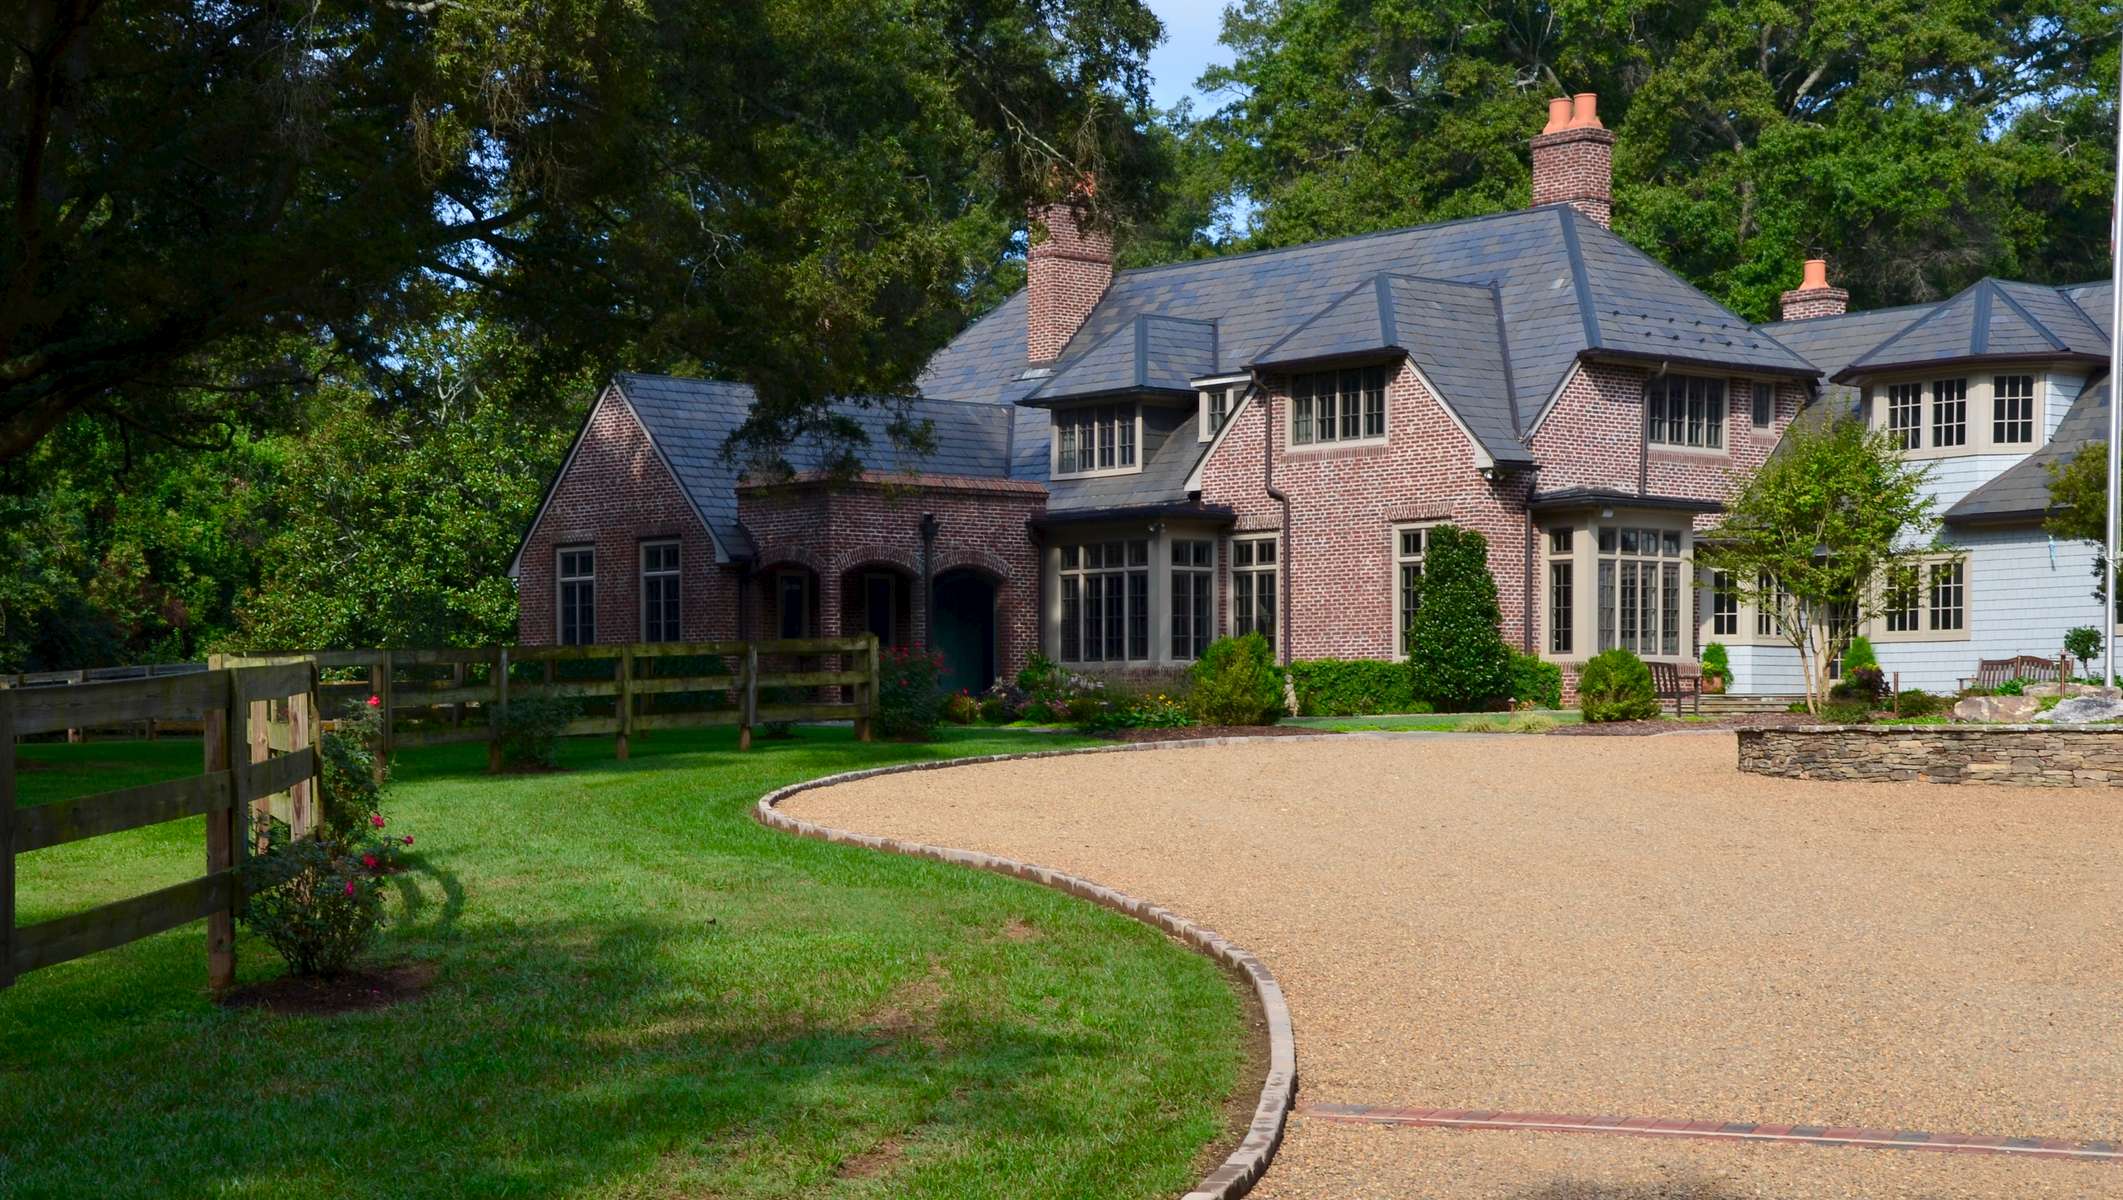 This private estate in Charlotte is one of the area's best kept secrets. The property is steeped in history with a rich background. Though we aren't disclosing the property's location, Solow Design Group does want to share the magnificence beyond it's majestice entrance!